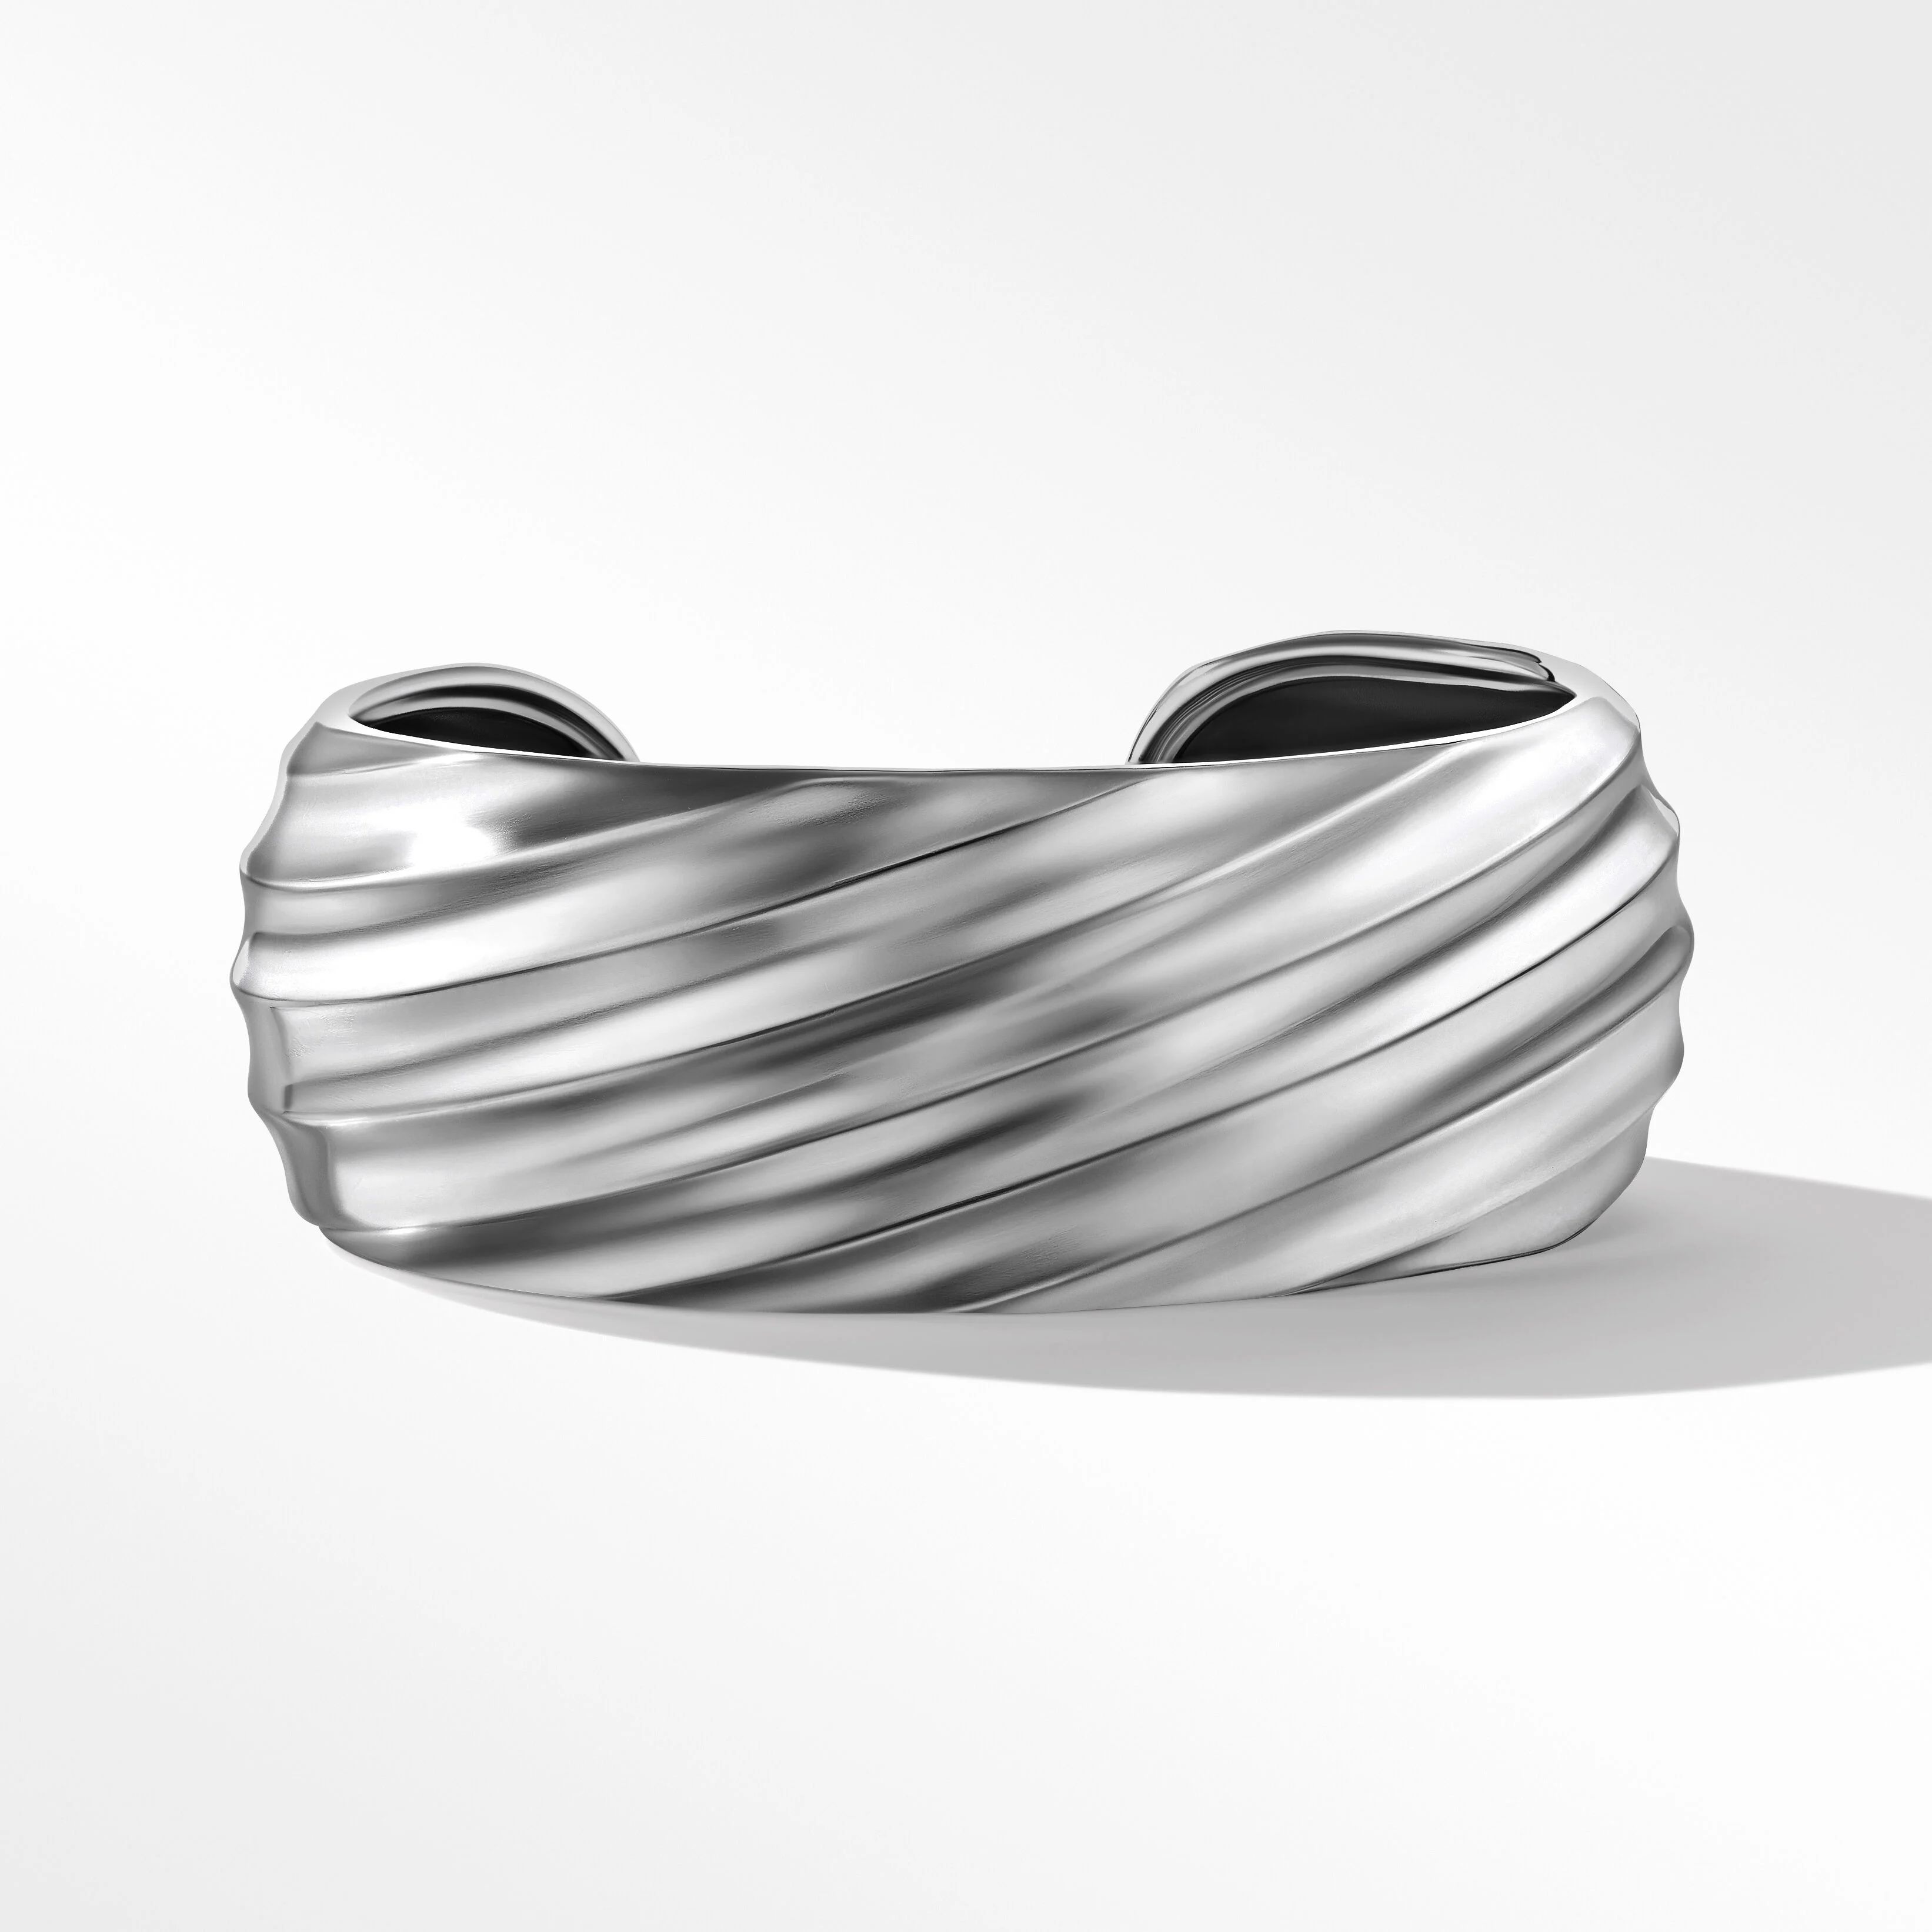 Cable Edge® Cuff Bracelet in Recycled Sterling Silver | David Yurman